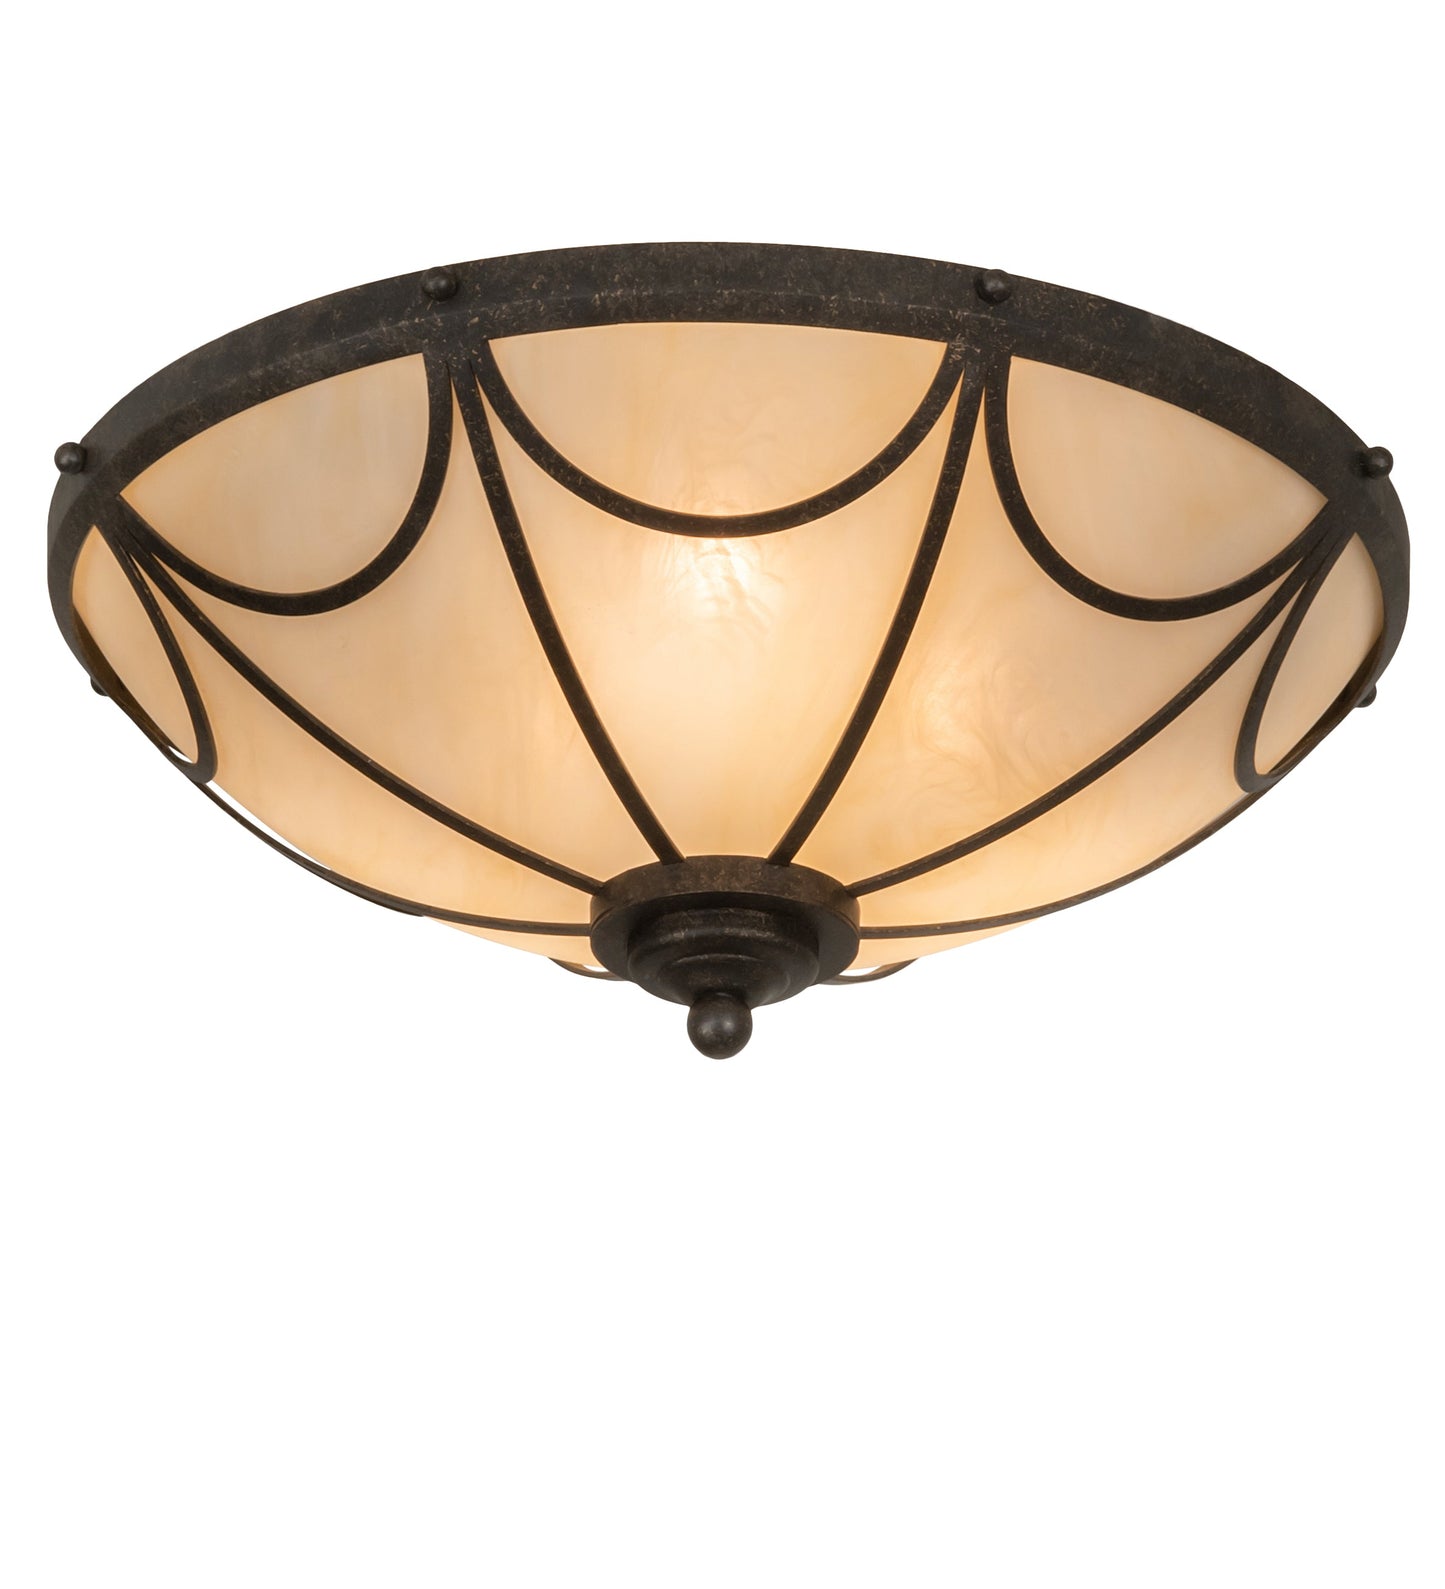 16" Carousel Flushmount by 2nd Ave Lighting